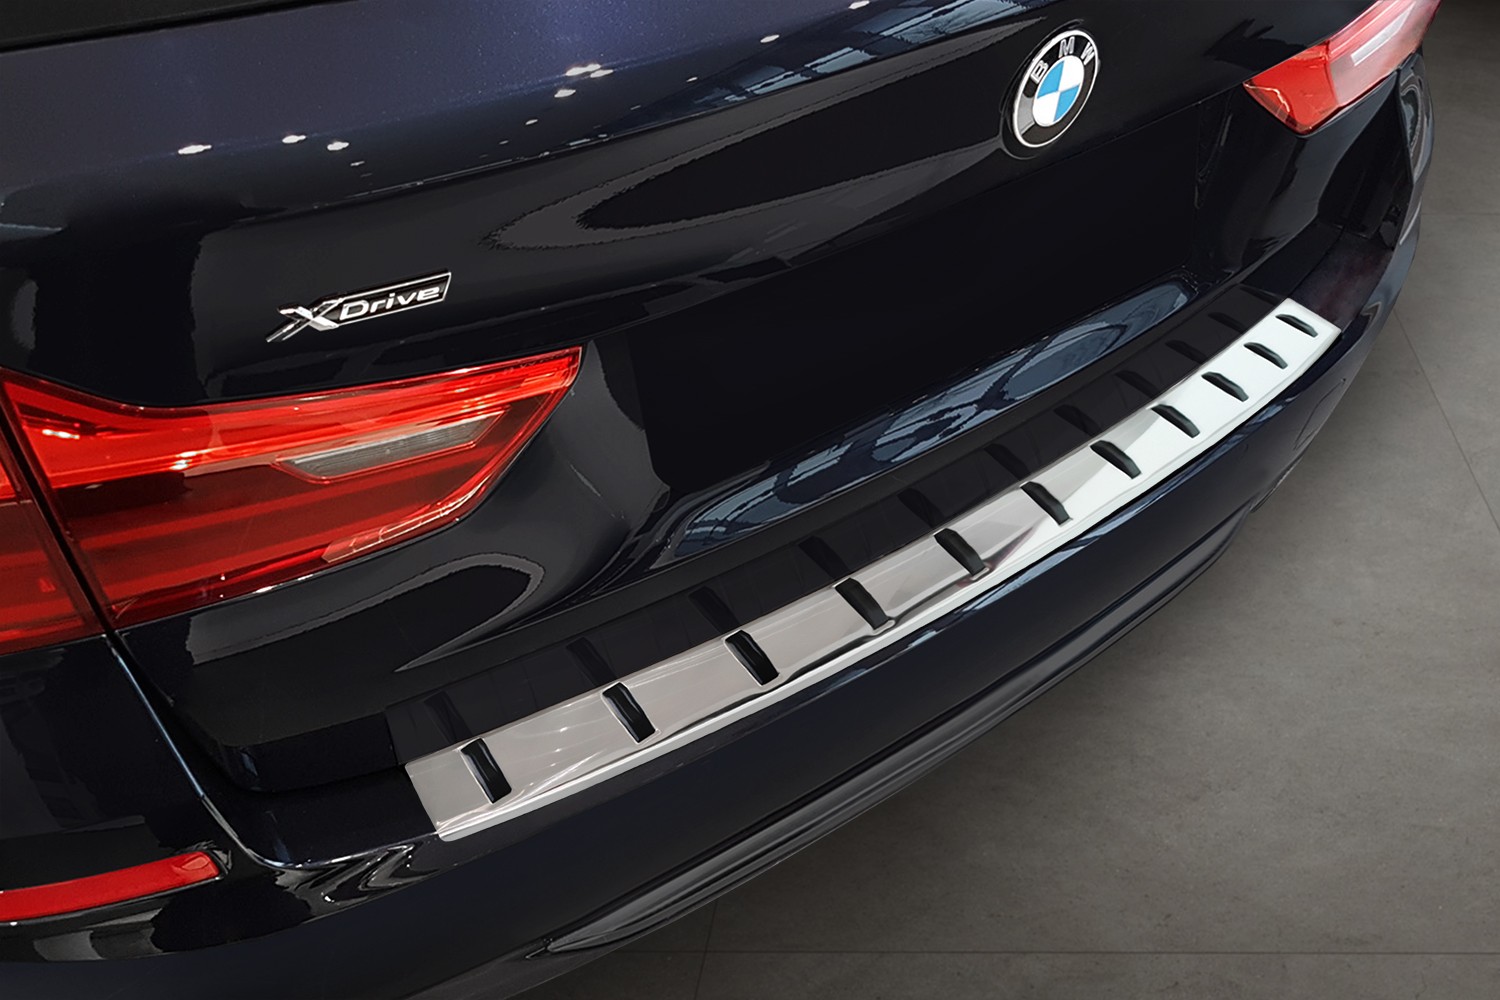 https://www.carparts-expert.com/images/stories/virtuemart/product/bmw455sbp-rear-bumper-protector-bmw-5-series-touring-g31-2017-2020-wagon-stainless-steel-1.jpg